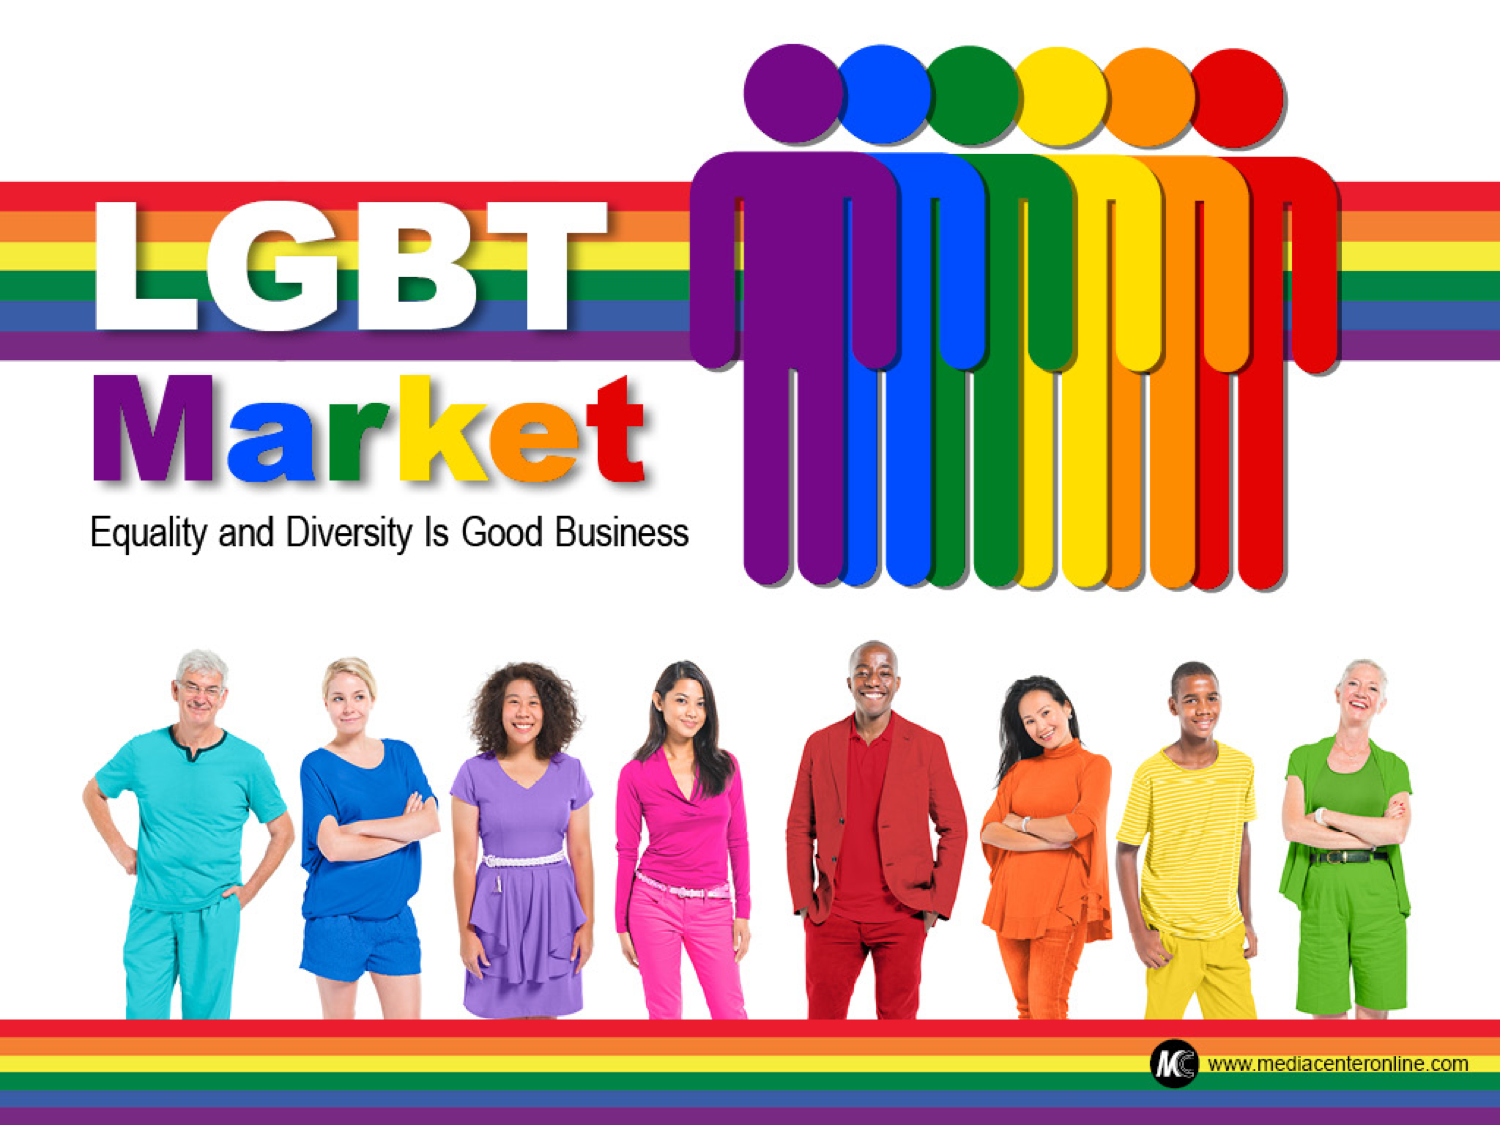 LGBT MARKET: EQUALITY AND DIVERSITY IS GOOD BUSINESS